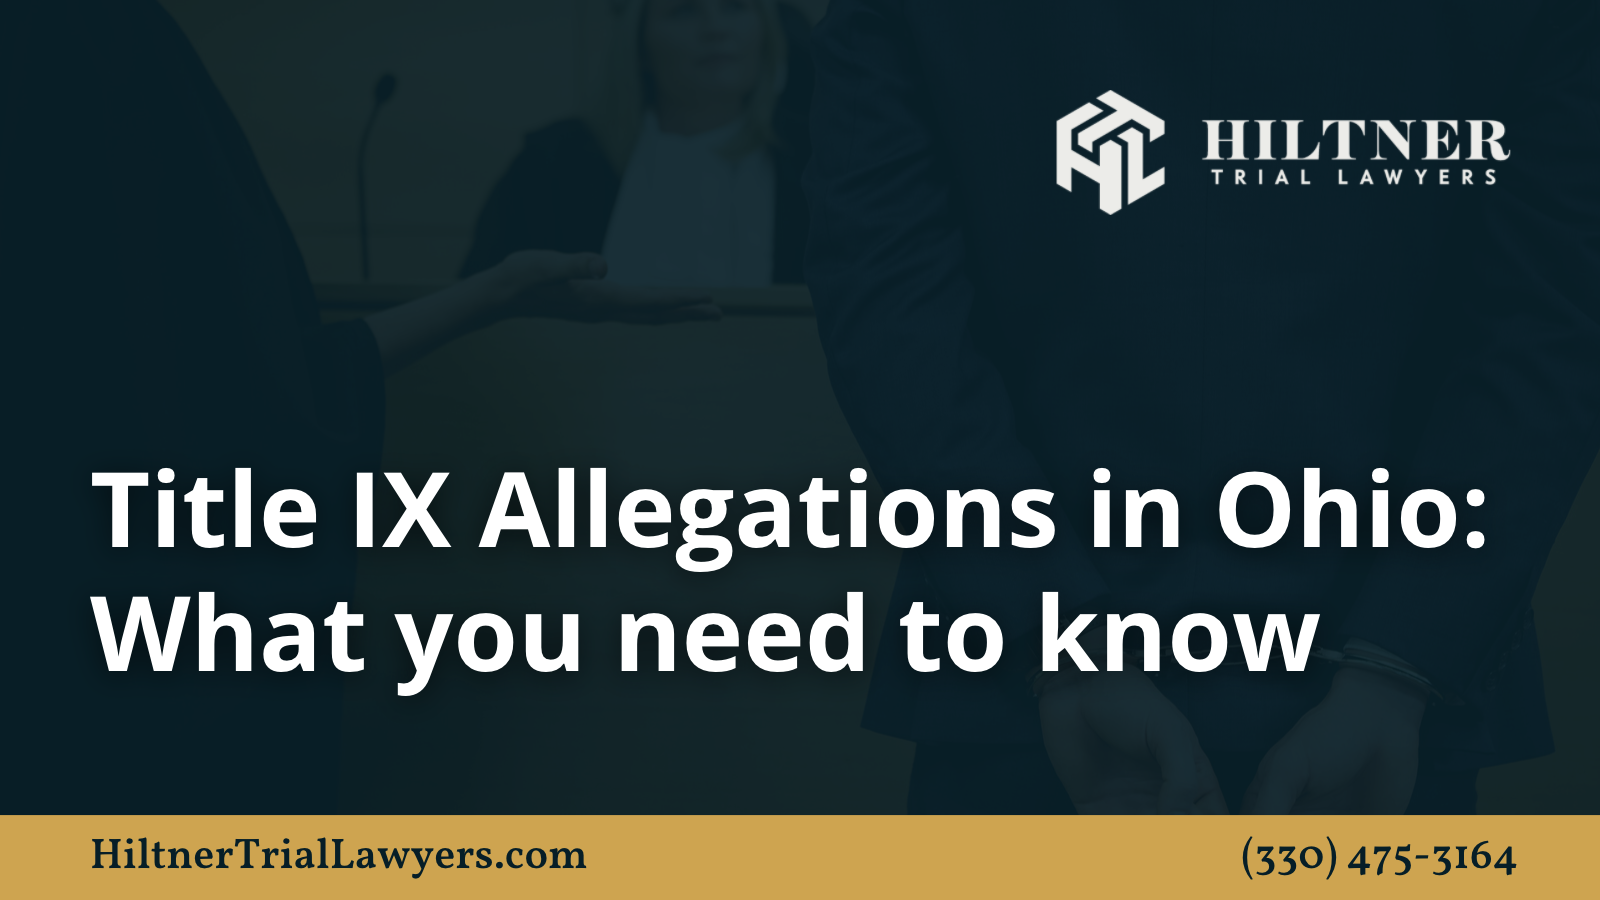 Title IX Allegations in Ohio - Hiltner Trial Lawyers Ohio - max hiltner